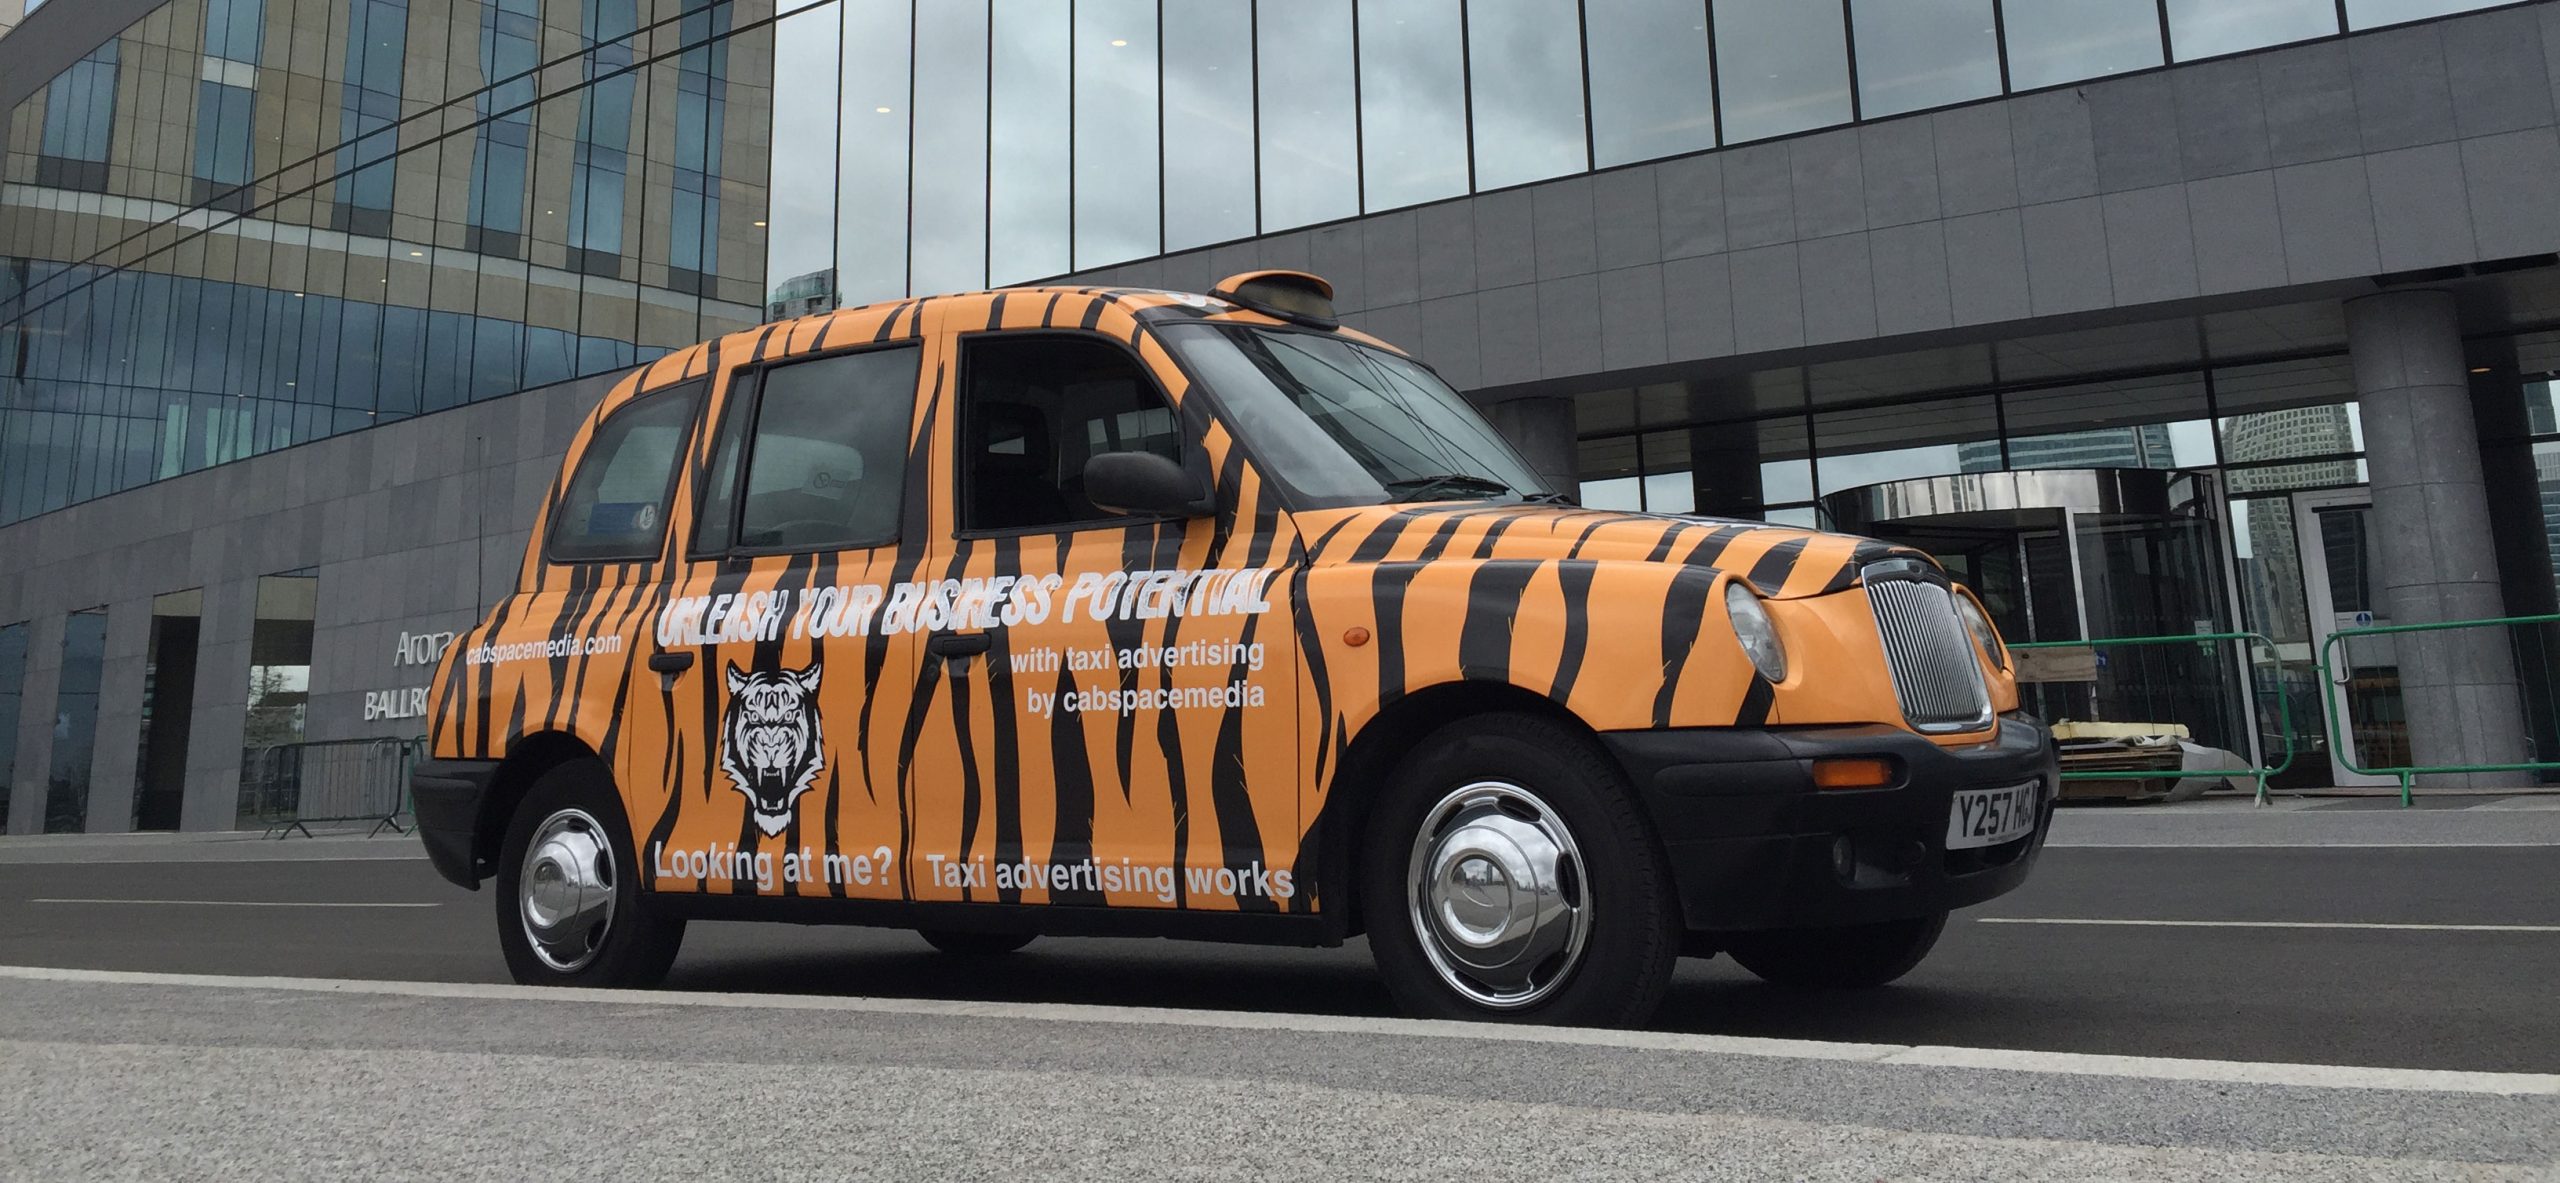 Taxi Advertising throughout the UK